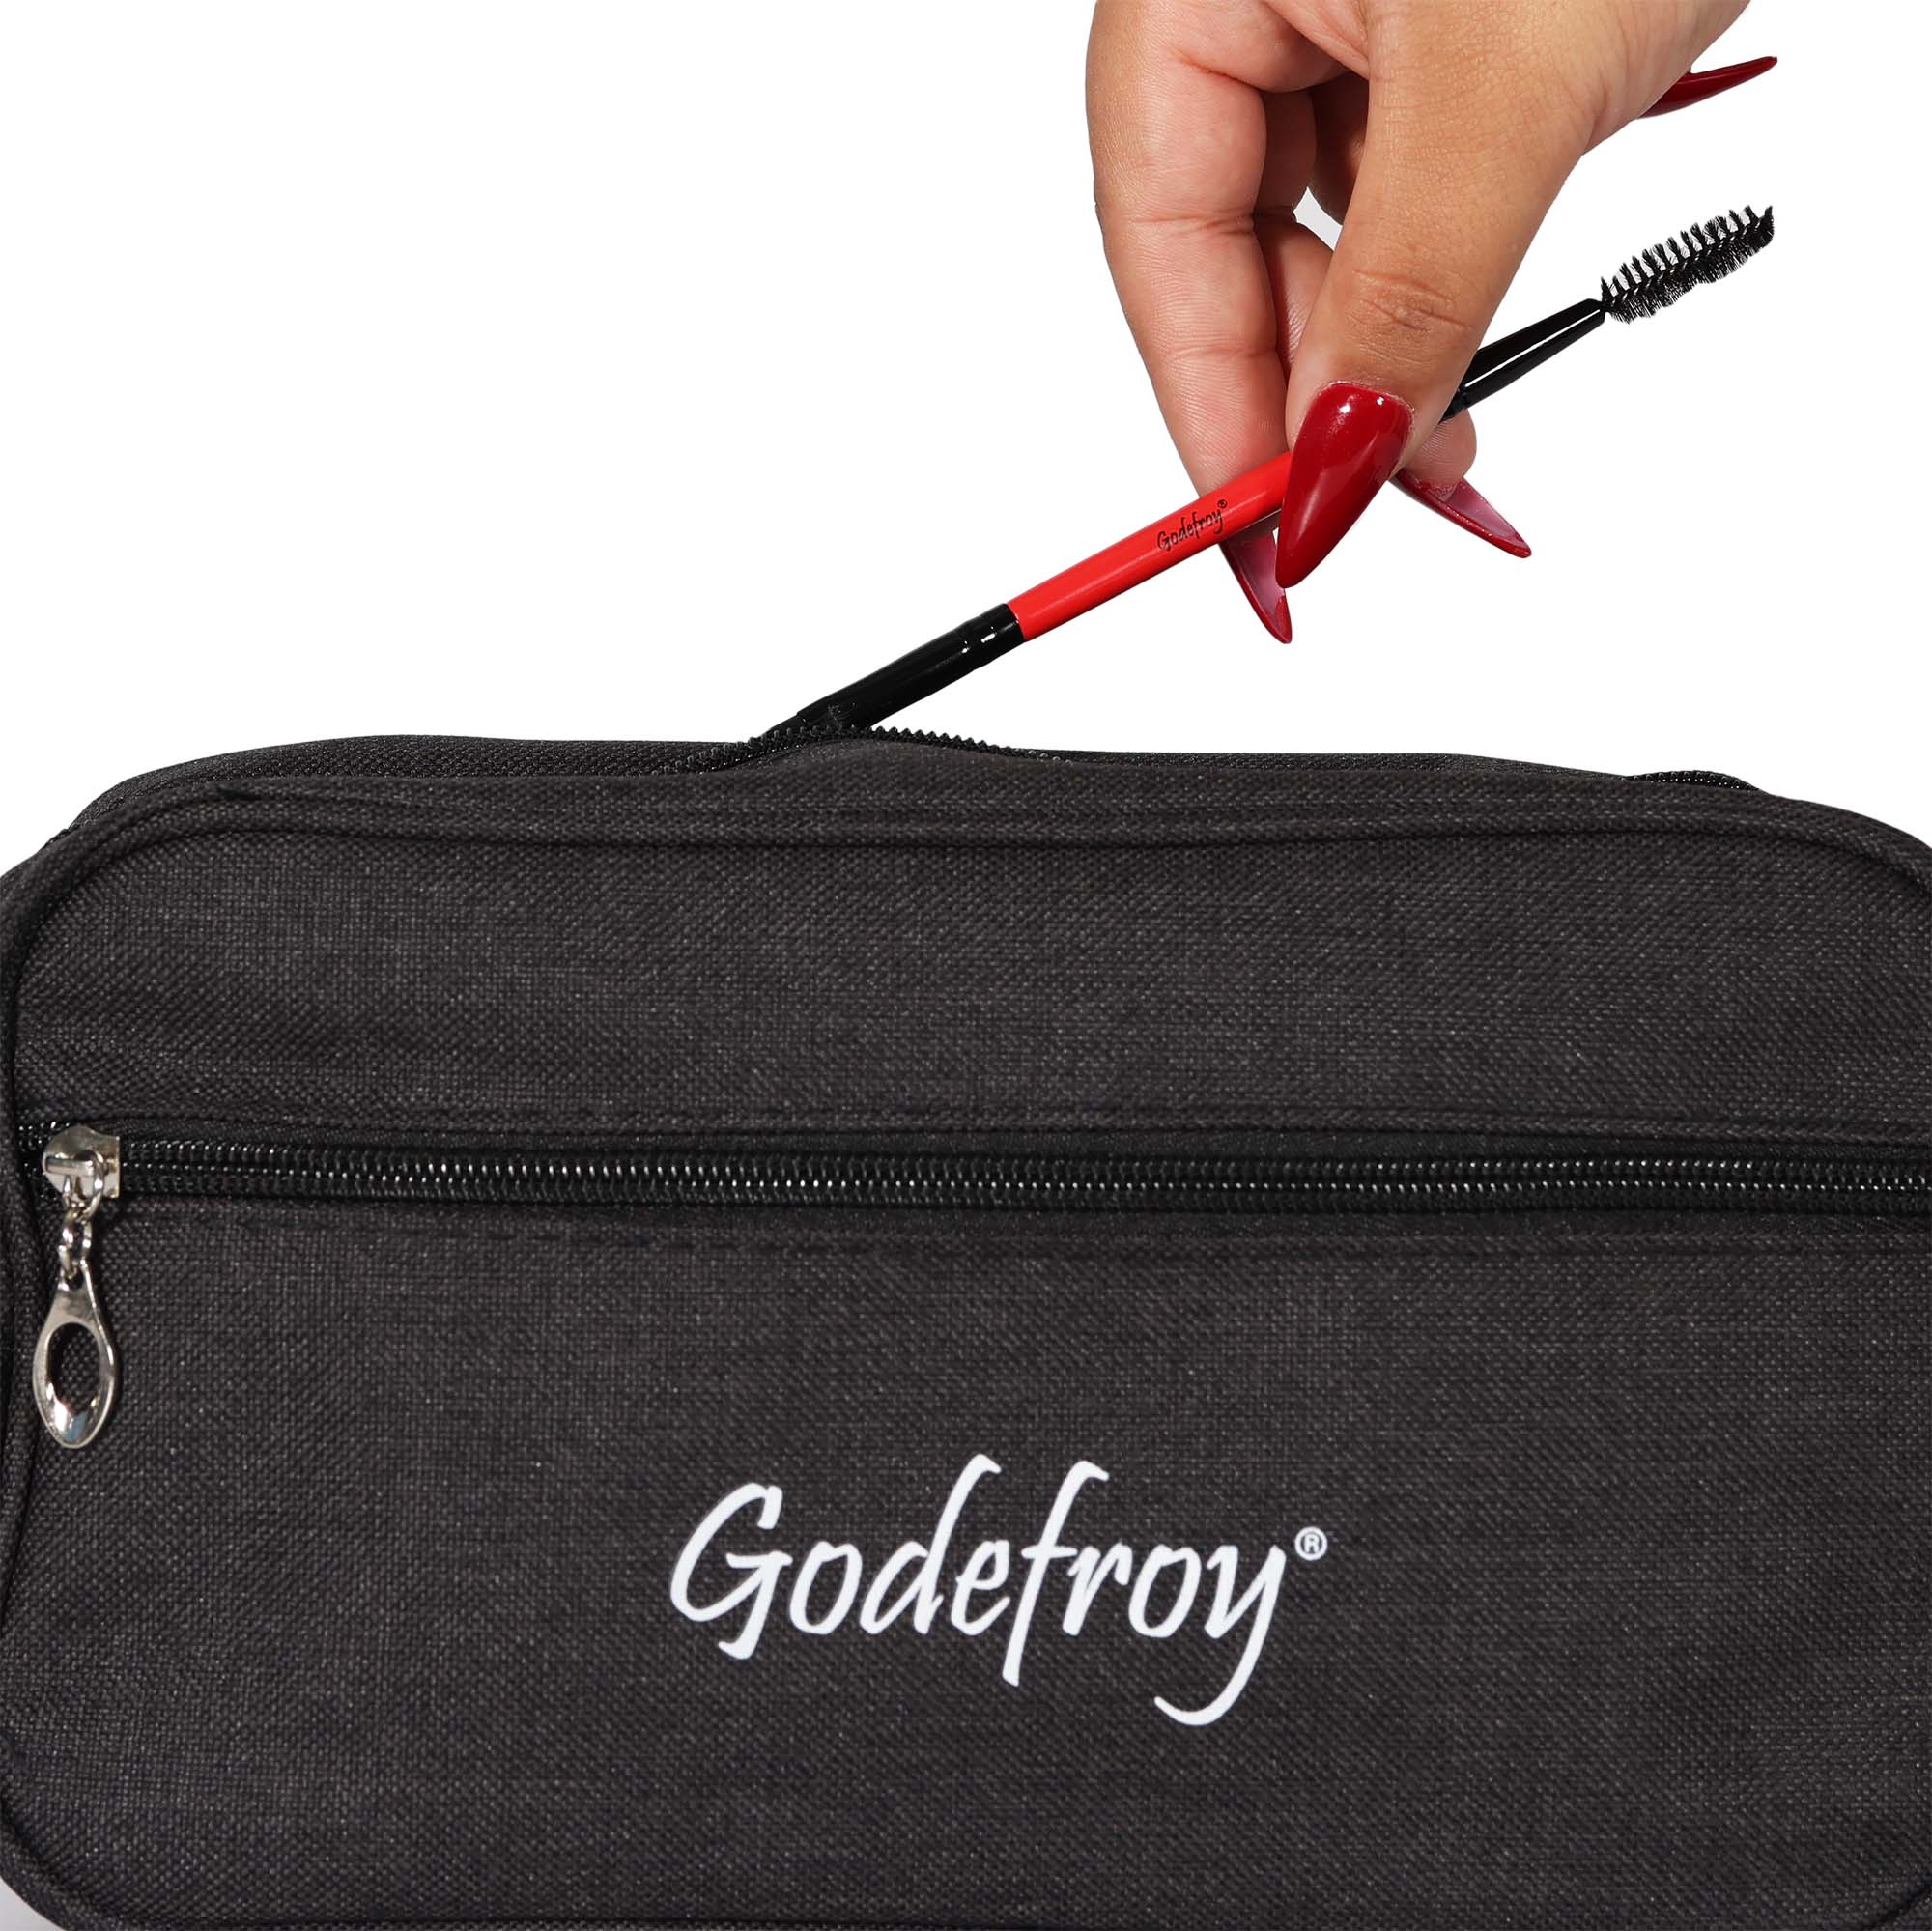 closeup Godefroy kit with red spoolie brush